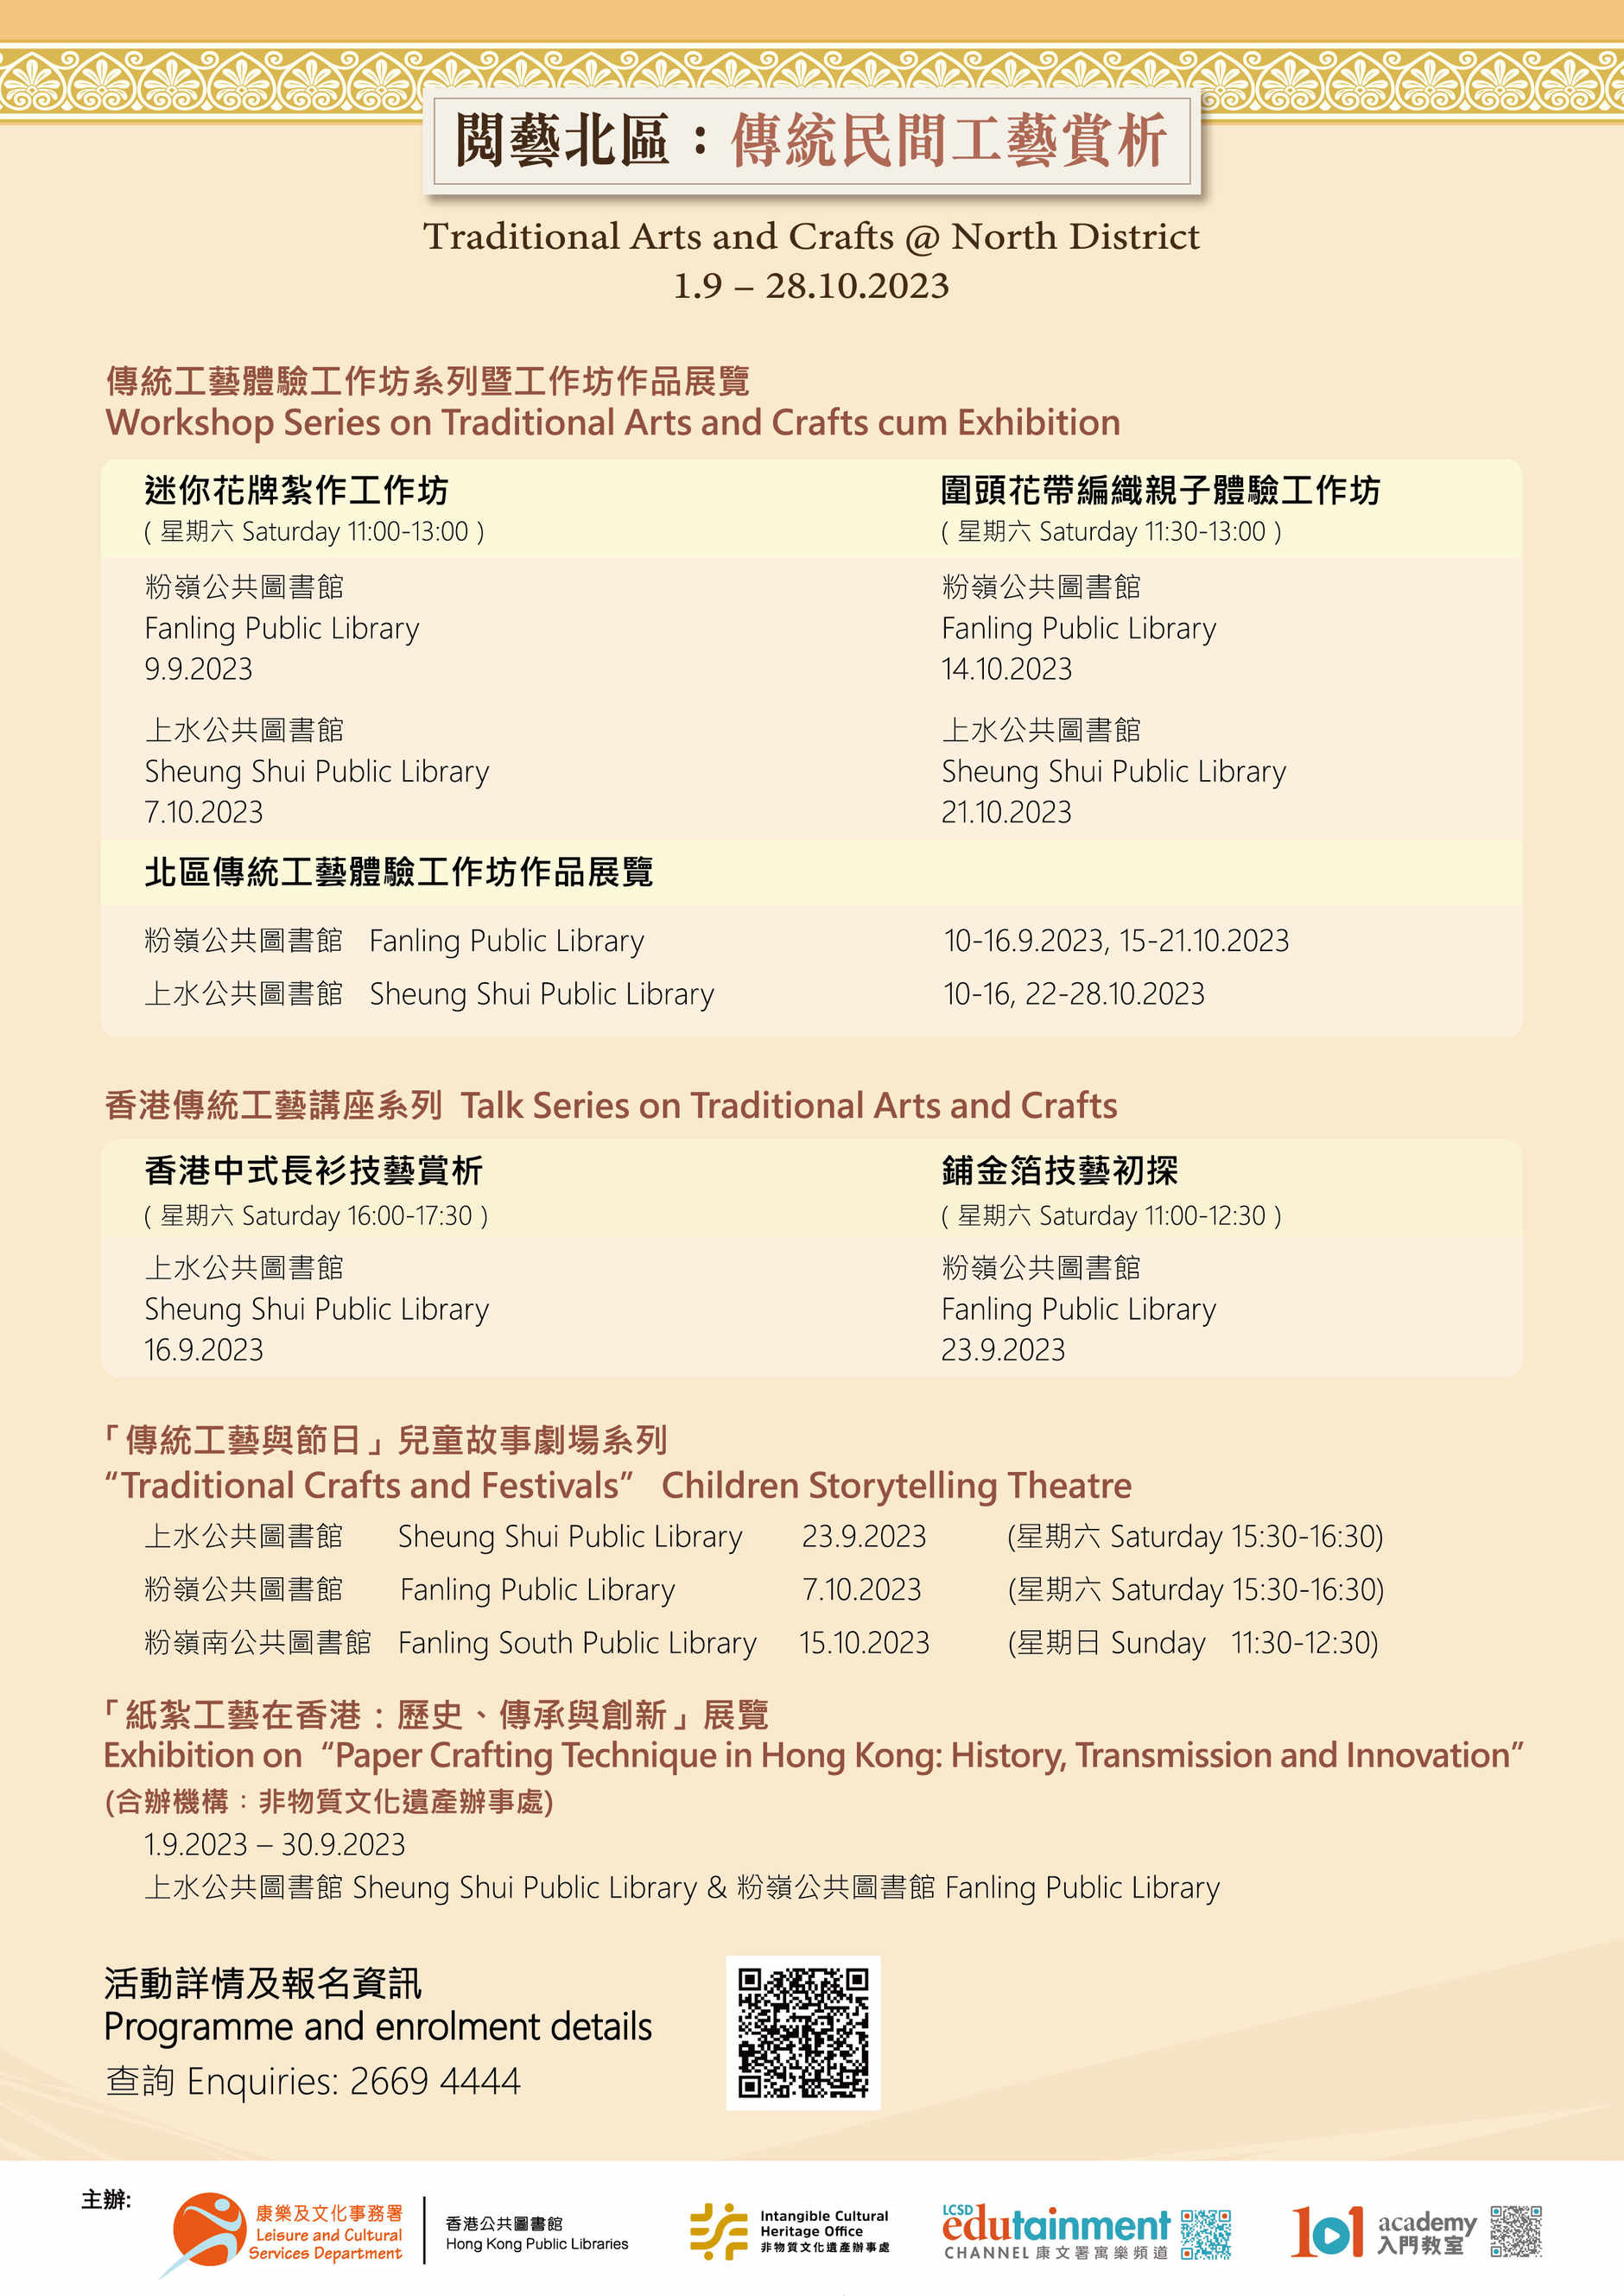 Exhibition on "Paper Crafting Technique in Hong Kong: History, Transmission and Innovation"